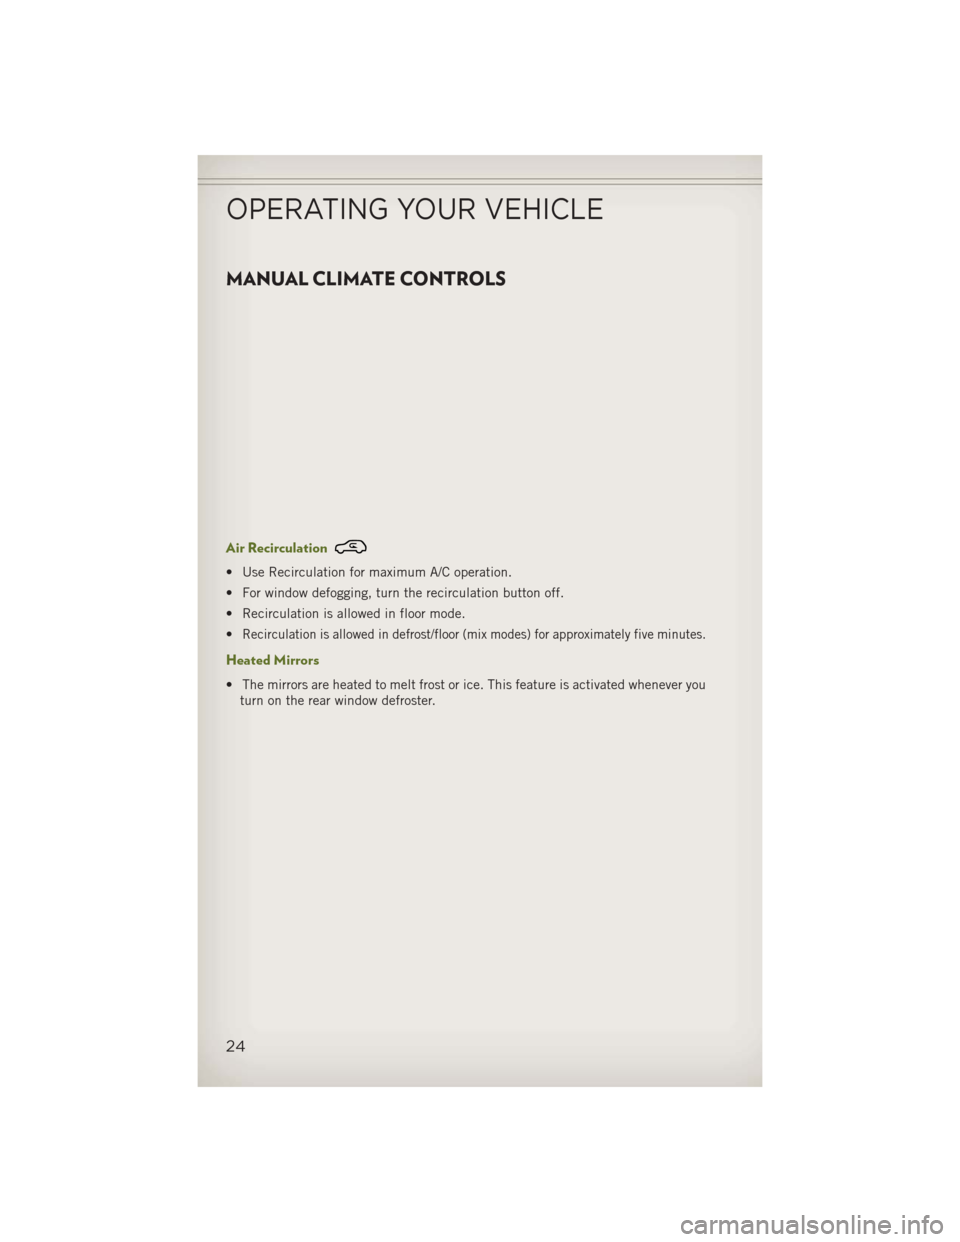 JEEP WRANGLER 2013 JK / 3.G User Guide MANUAL CLIMATE CONTROLS
Air Recirculation
• Use Recirculation for maximum A/C operation.
• For window defogging, turn the recirculation button off.
• Recirculation is allowed in floor mode.
•
